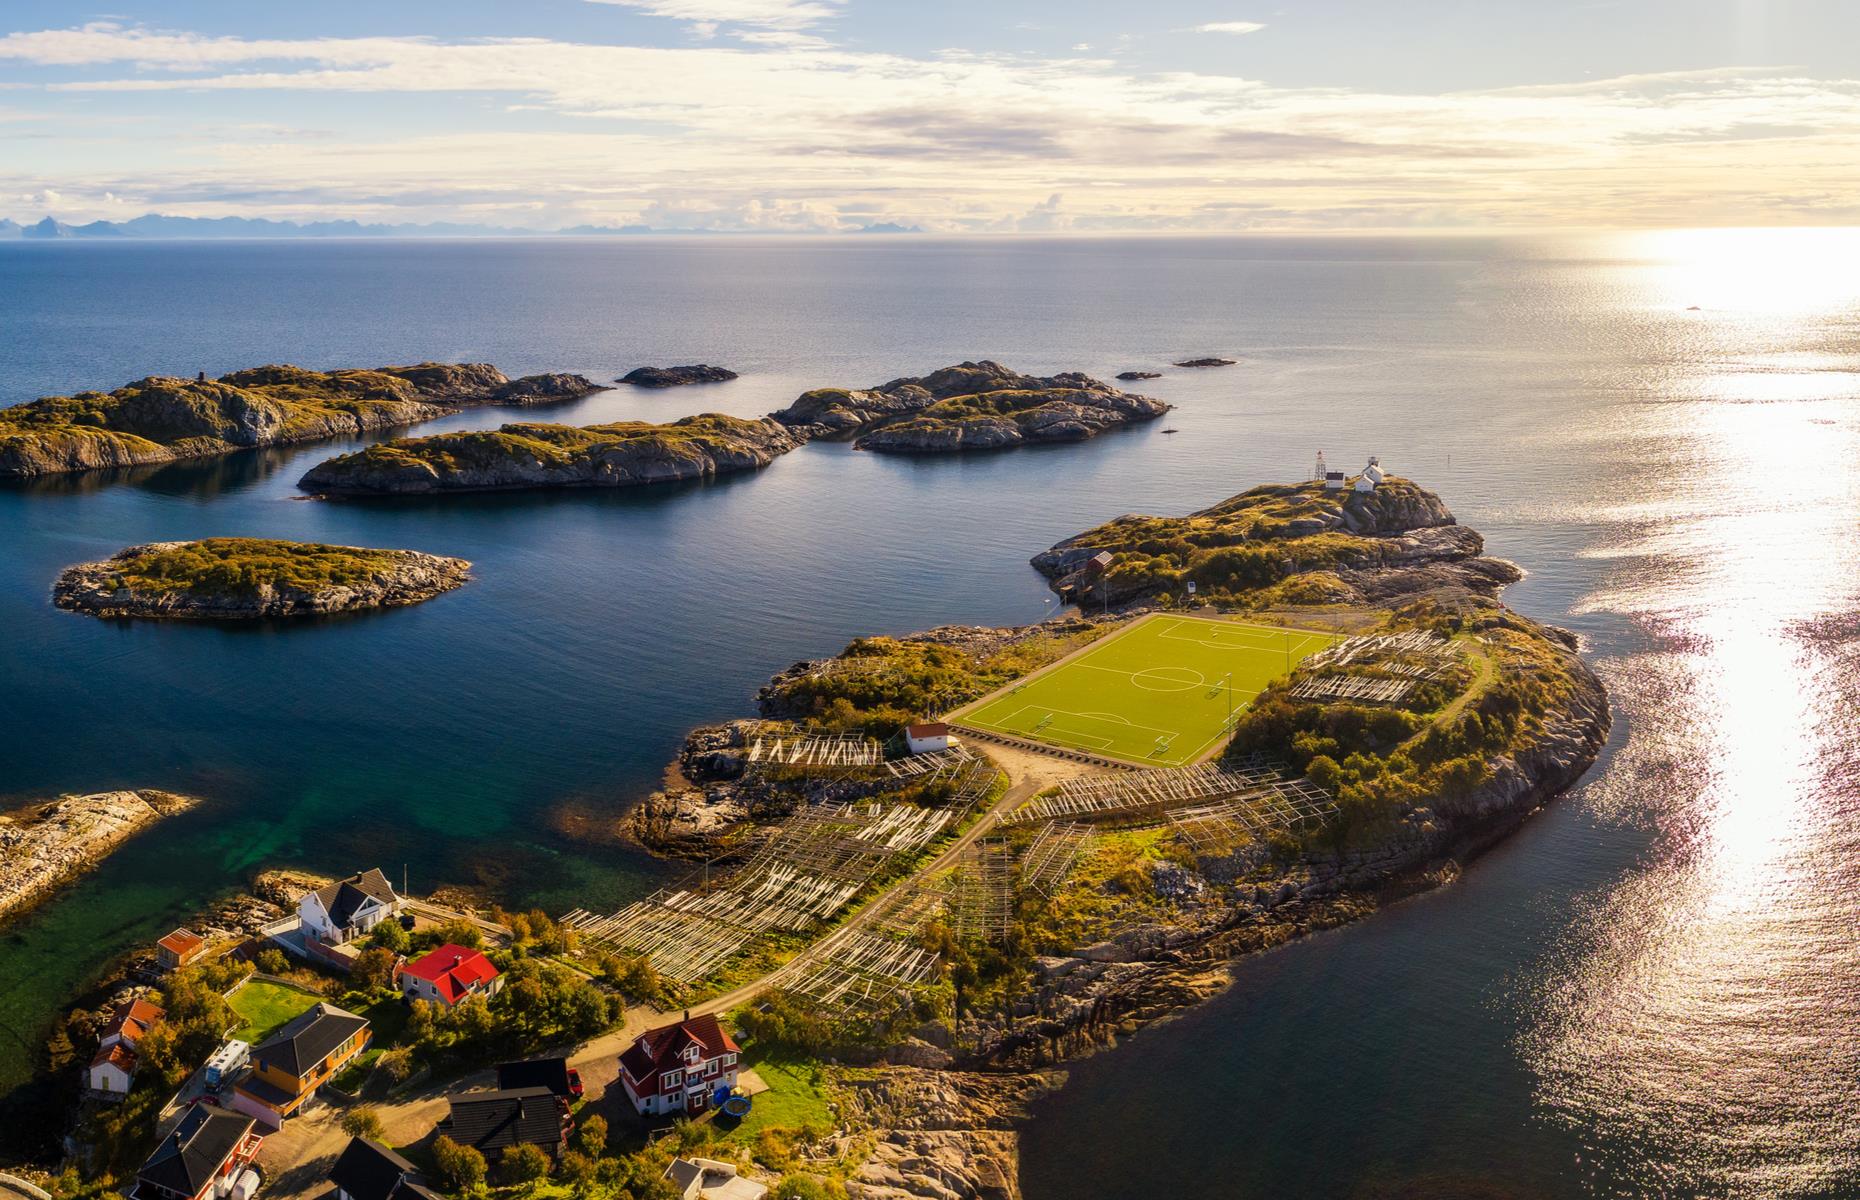 <p>Home to the second ultra-remote soccer pitch in our round-up, Henningsvær is a traditional fishing village located on the southern side of Norway’s Lofoten Islands. With its idyllic wooden houses perched atop a rocky finger of land reaching out into ice-cold seas, this far-flung village is as secluded as they come.</p>  <p><strong><a href="https://www.loveexploring.com/gallerylist/103411/the-worlds-most-beautiful-coasts">Discover the world's most stunning coastlines</a></strong></p>